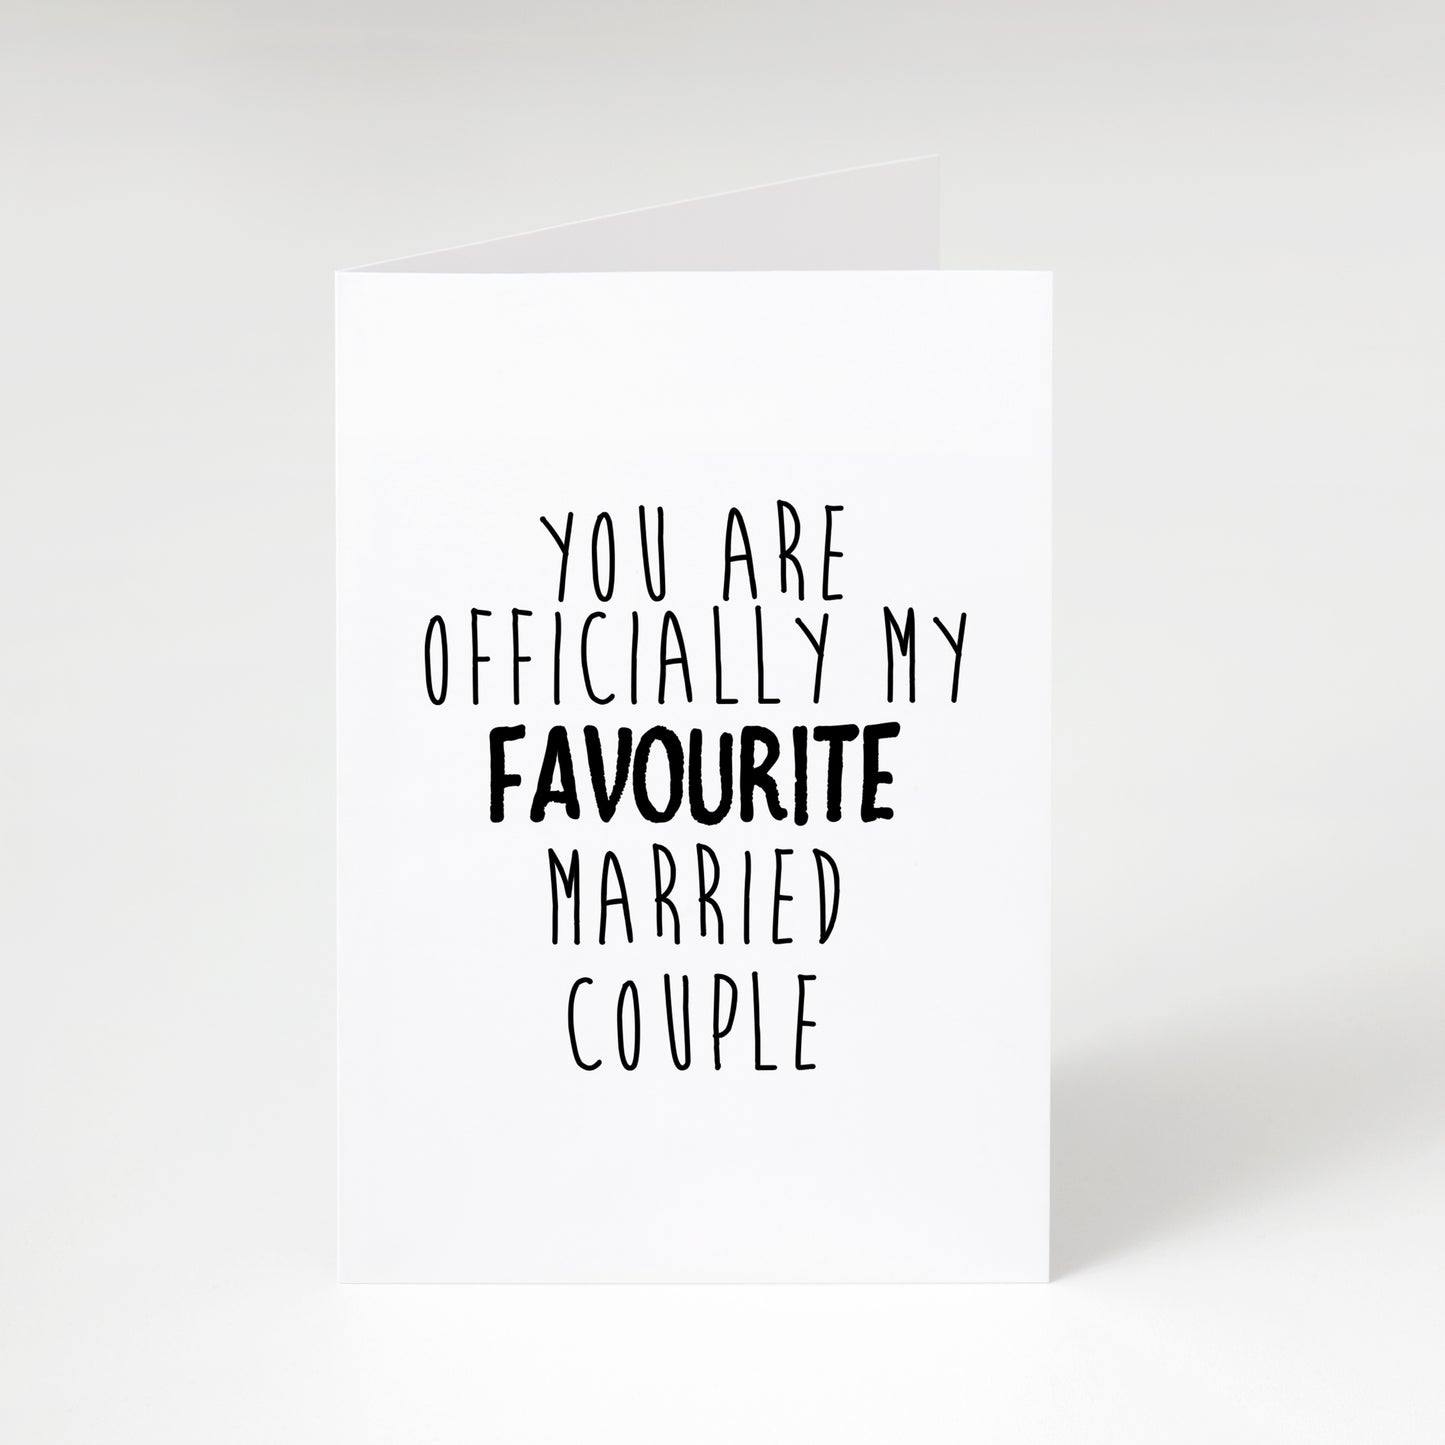 Favourite Married Couple - Greeting Card